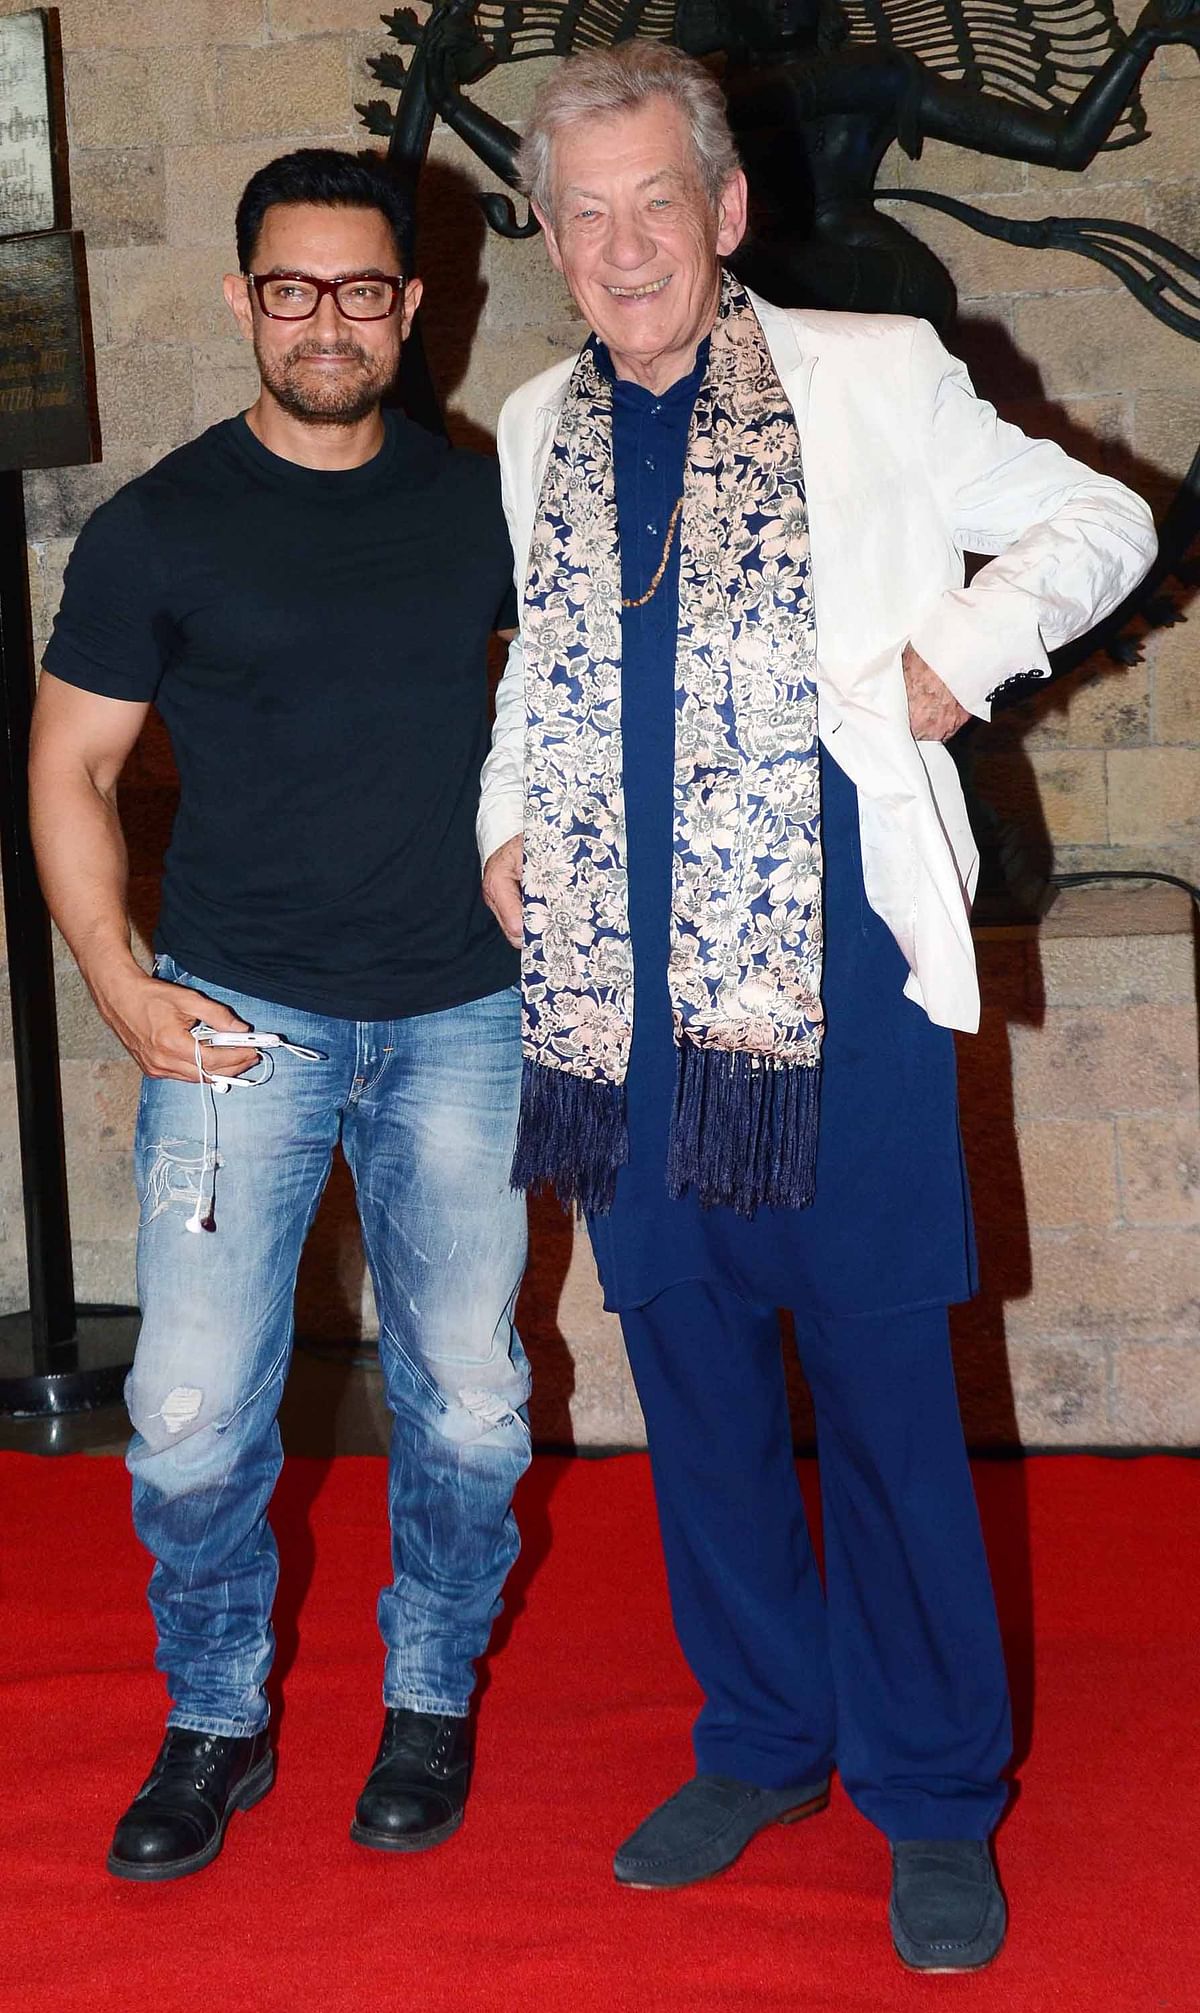 Bollywood celebrates Shakespeare with Aamir Khan and ‘The Lord of the Rings’ actor Ian McKellen 